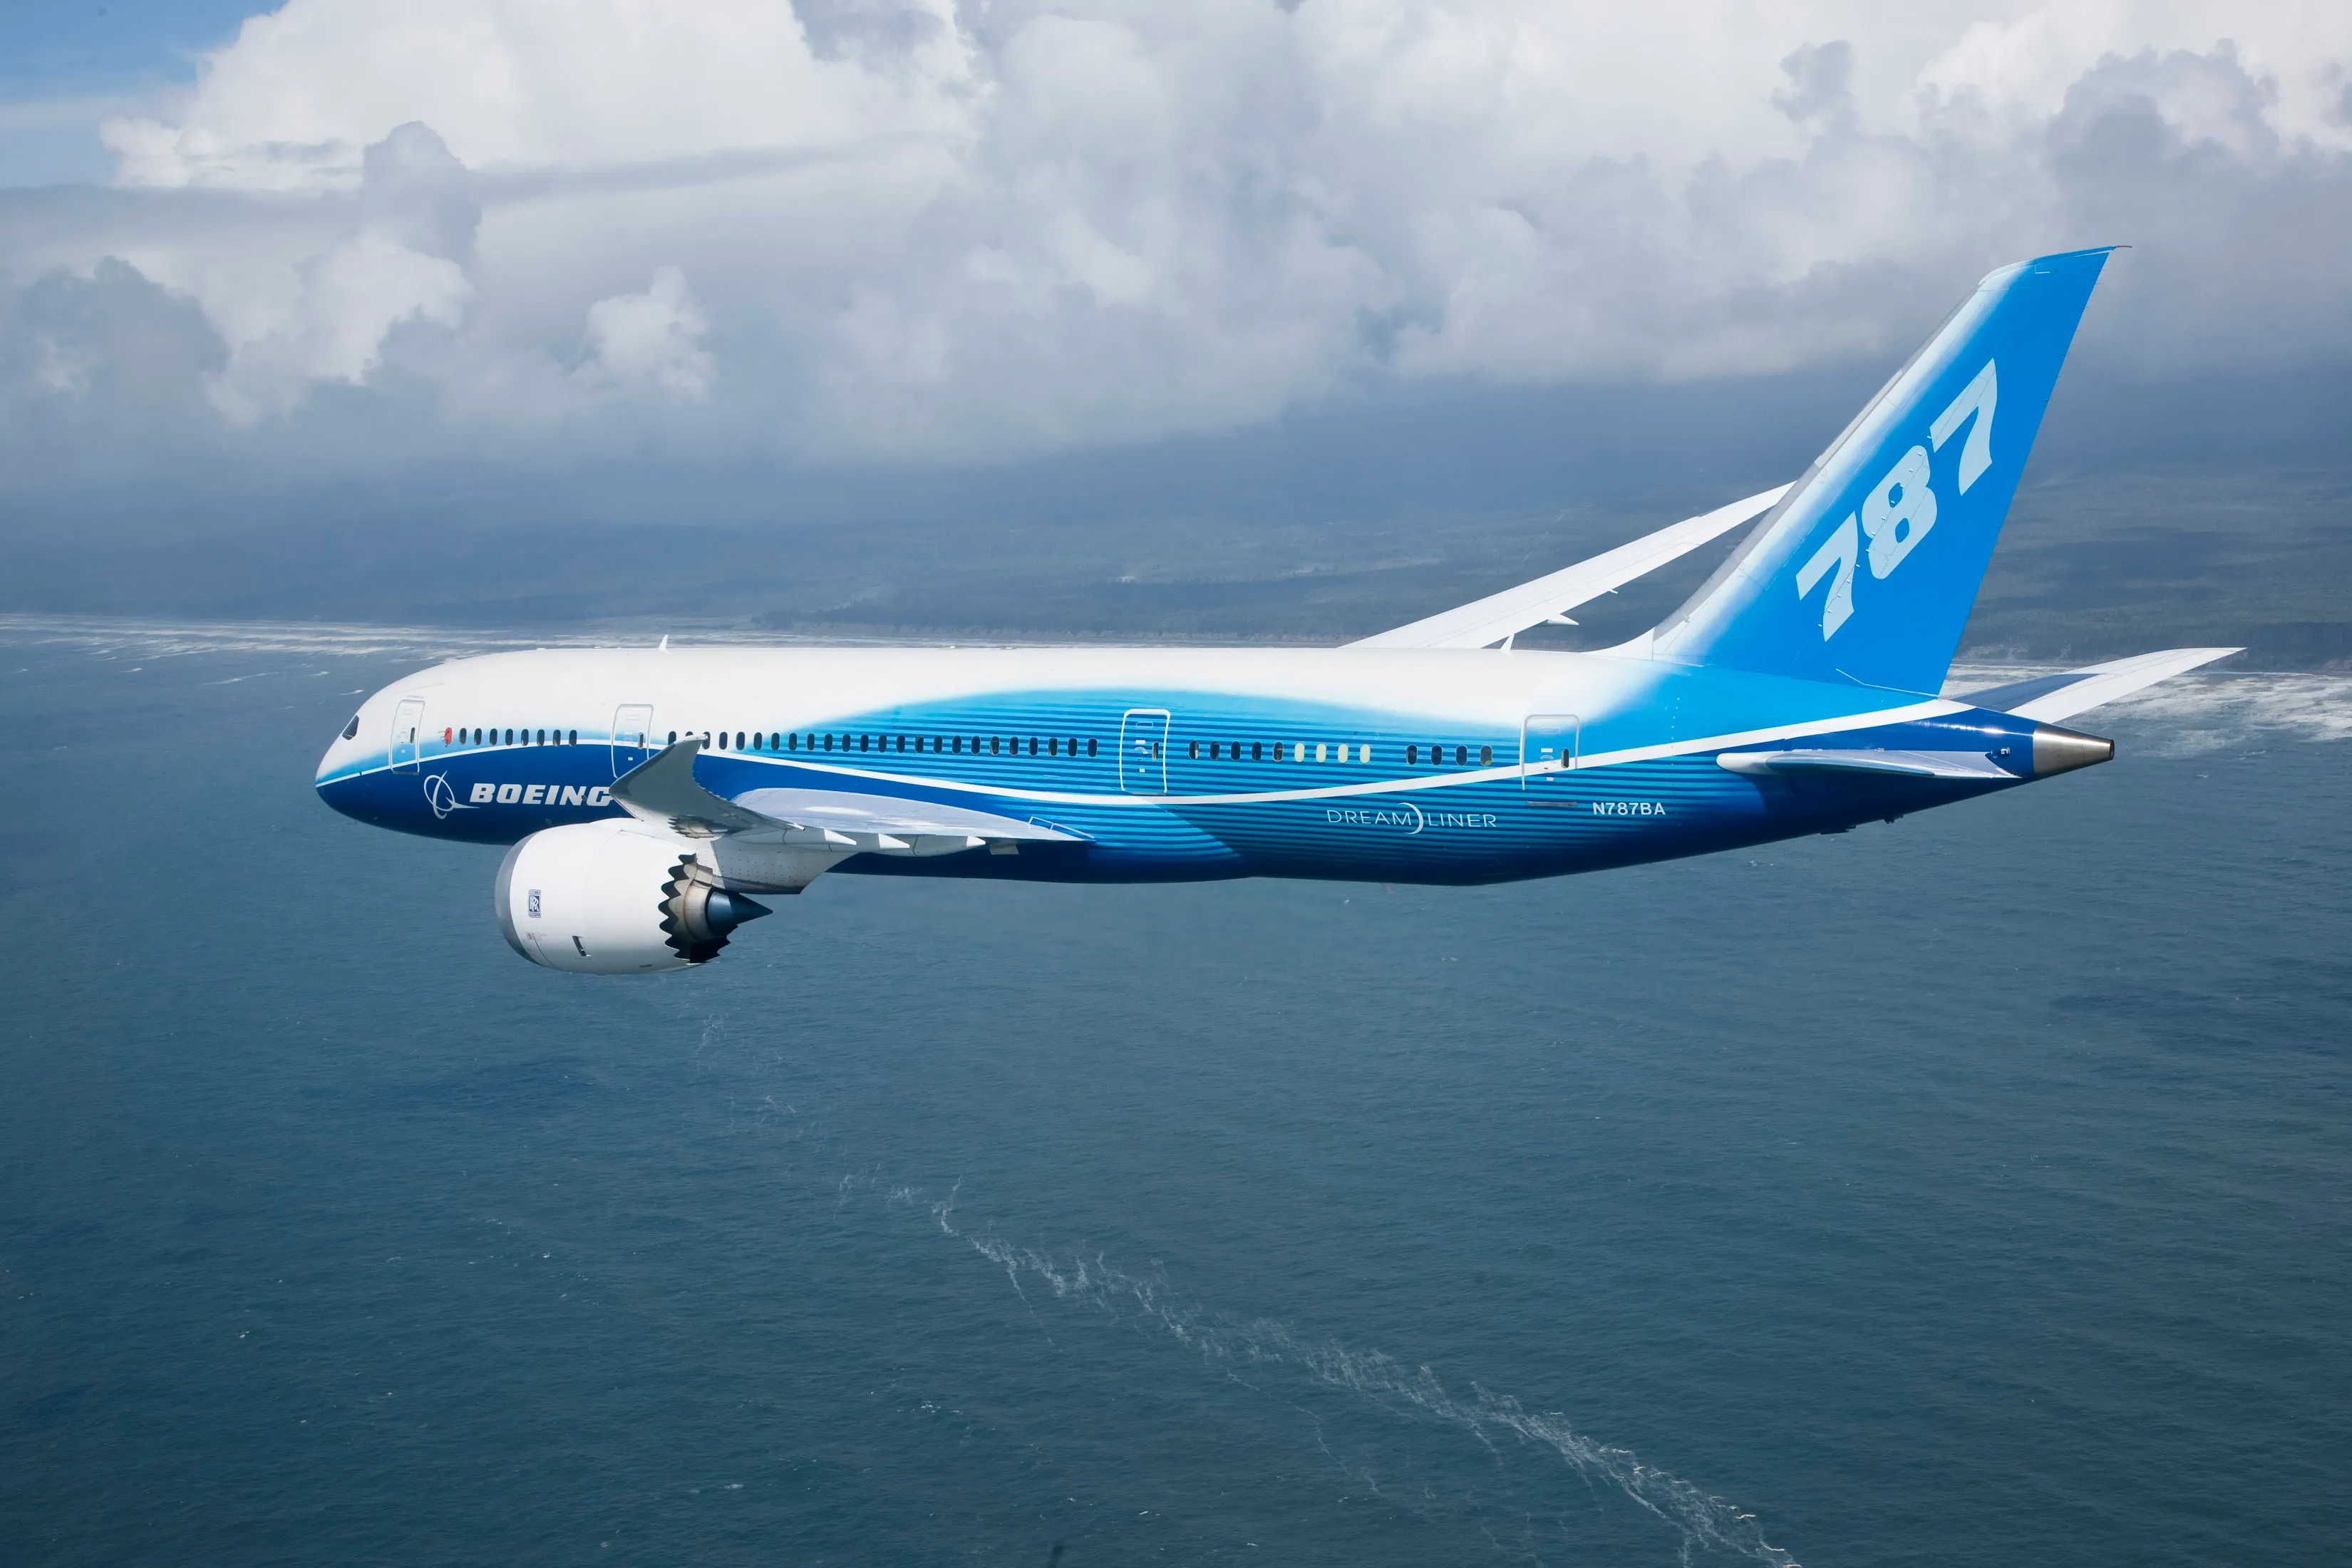 The largest contract in aviation history - United Airlines ordered 100 Boeing 787 Dreamliner and 56 Boeing 737 Max